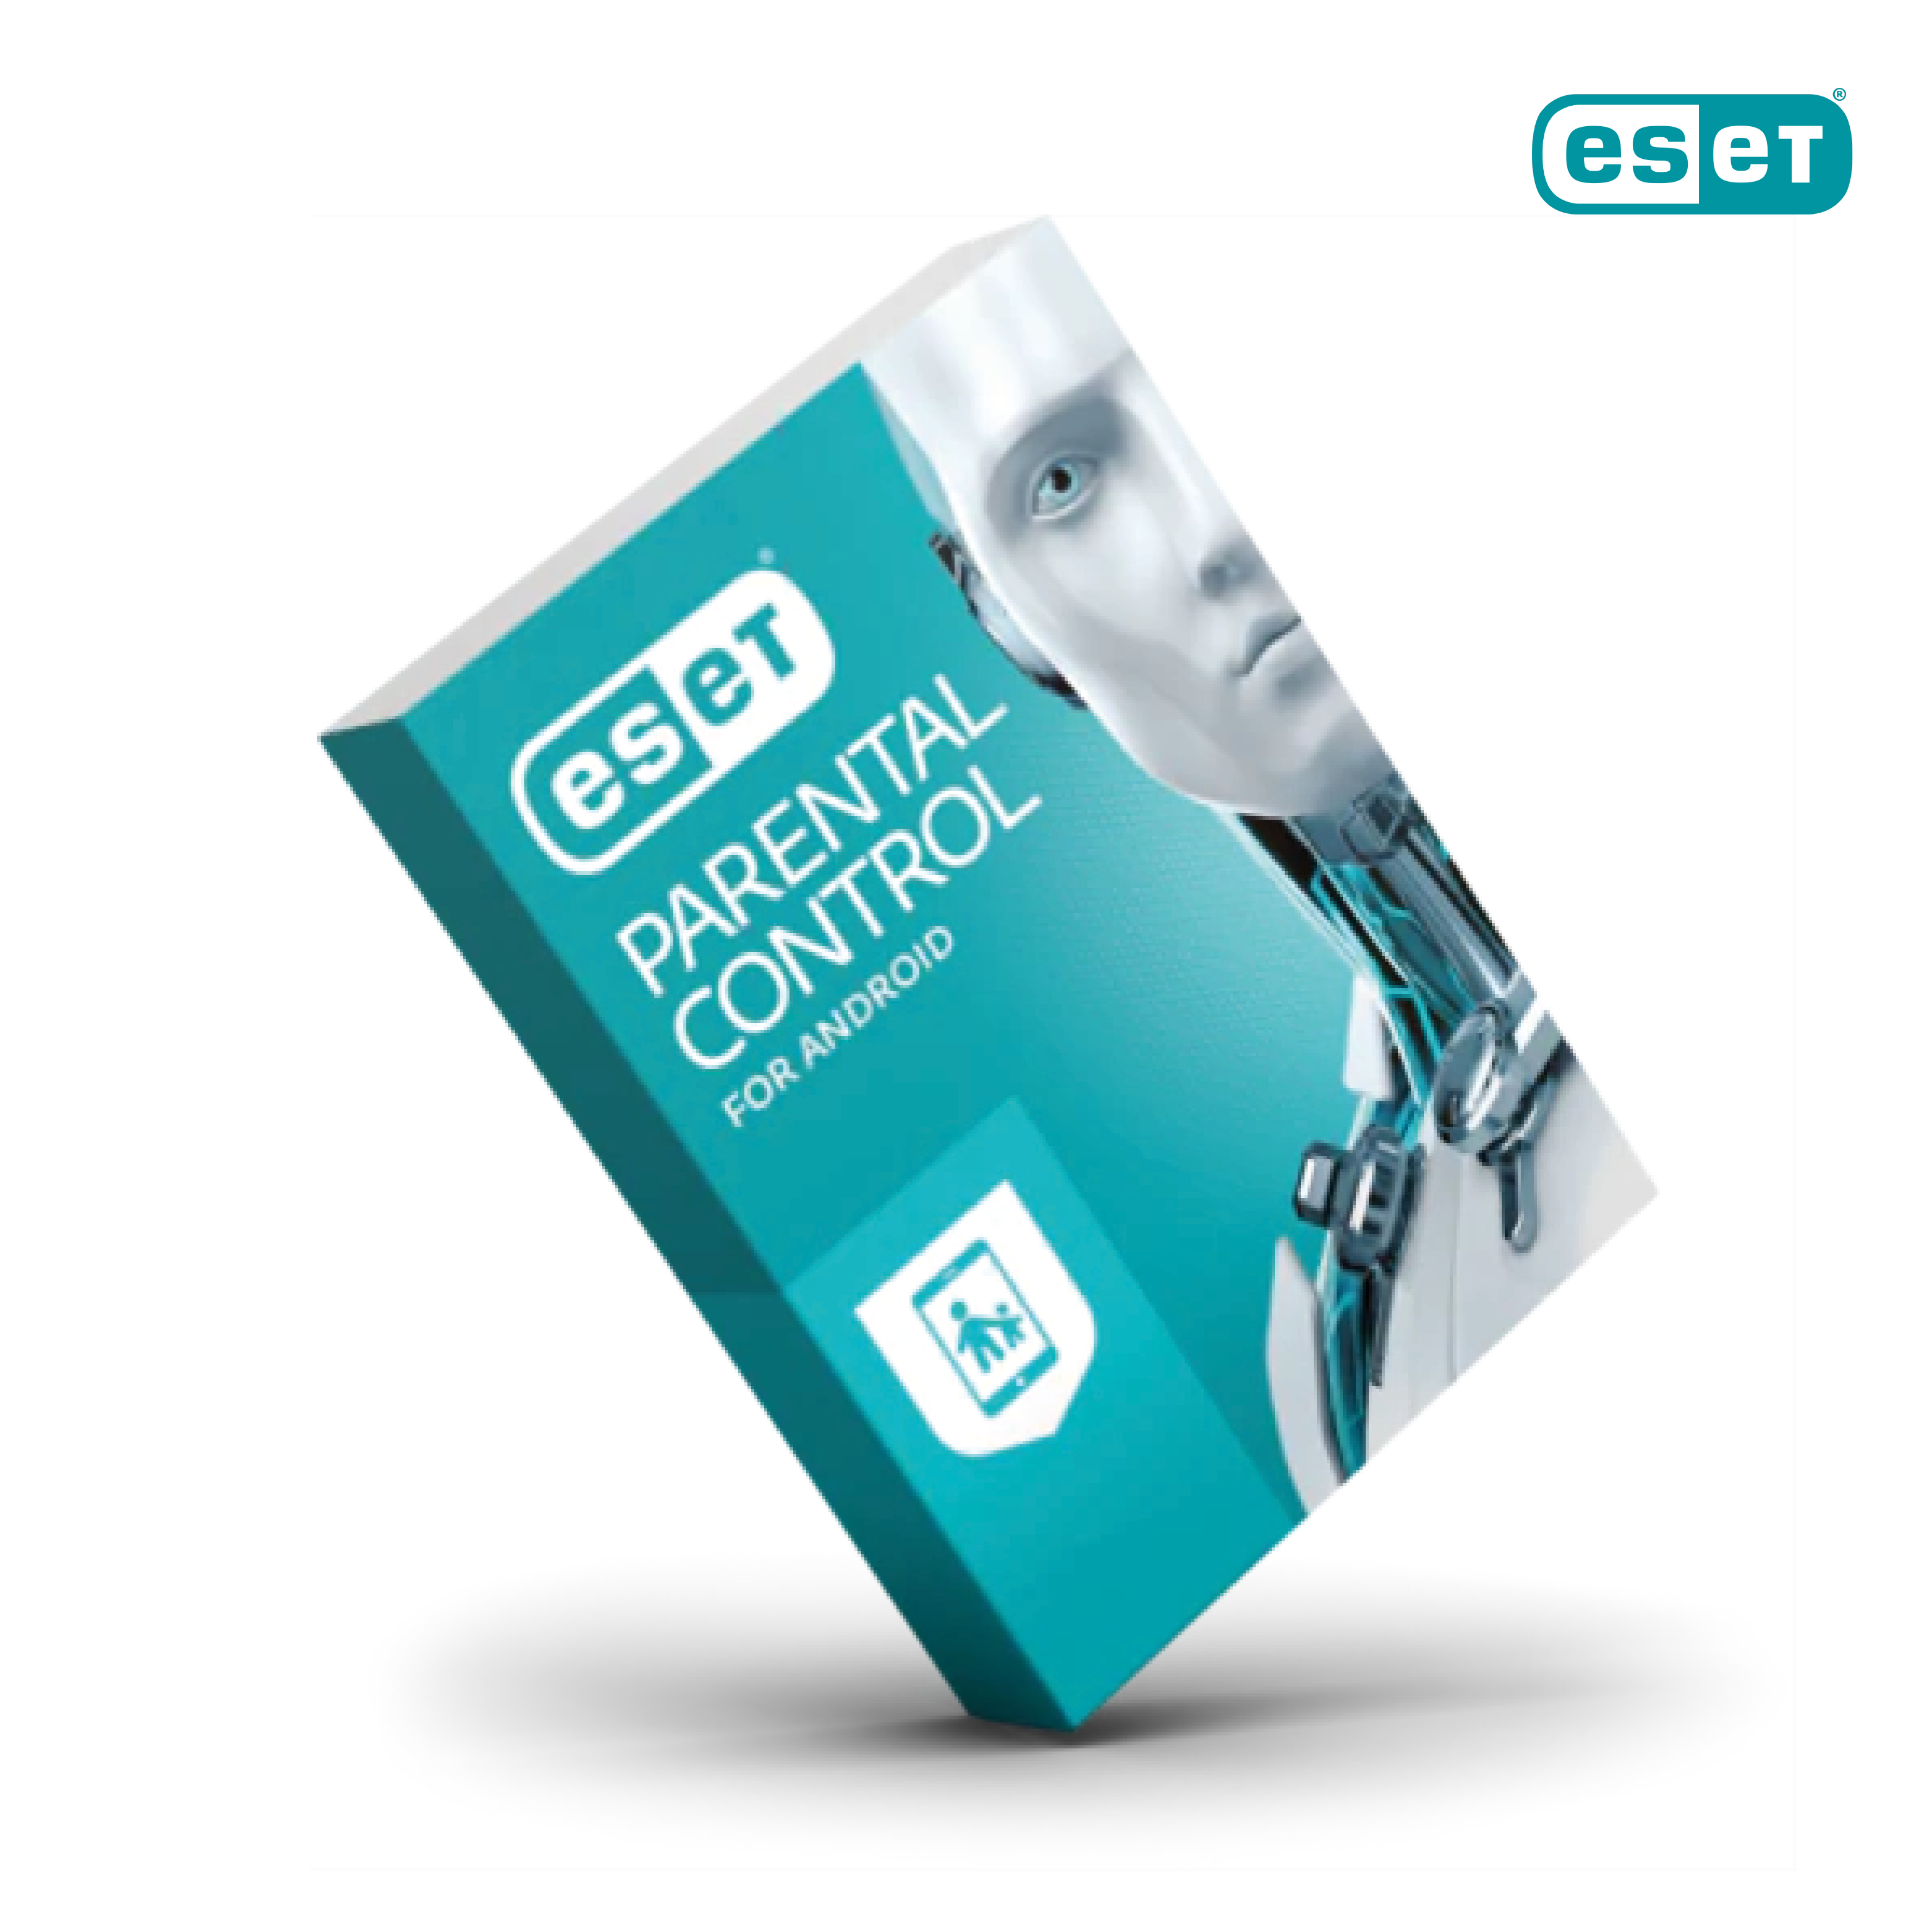 ESET Parental Control Family License 1 year 1 Family Download Android Multilenguaje - DIGITAL